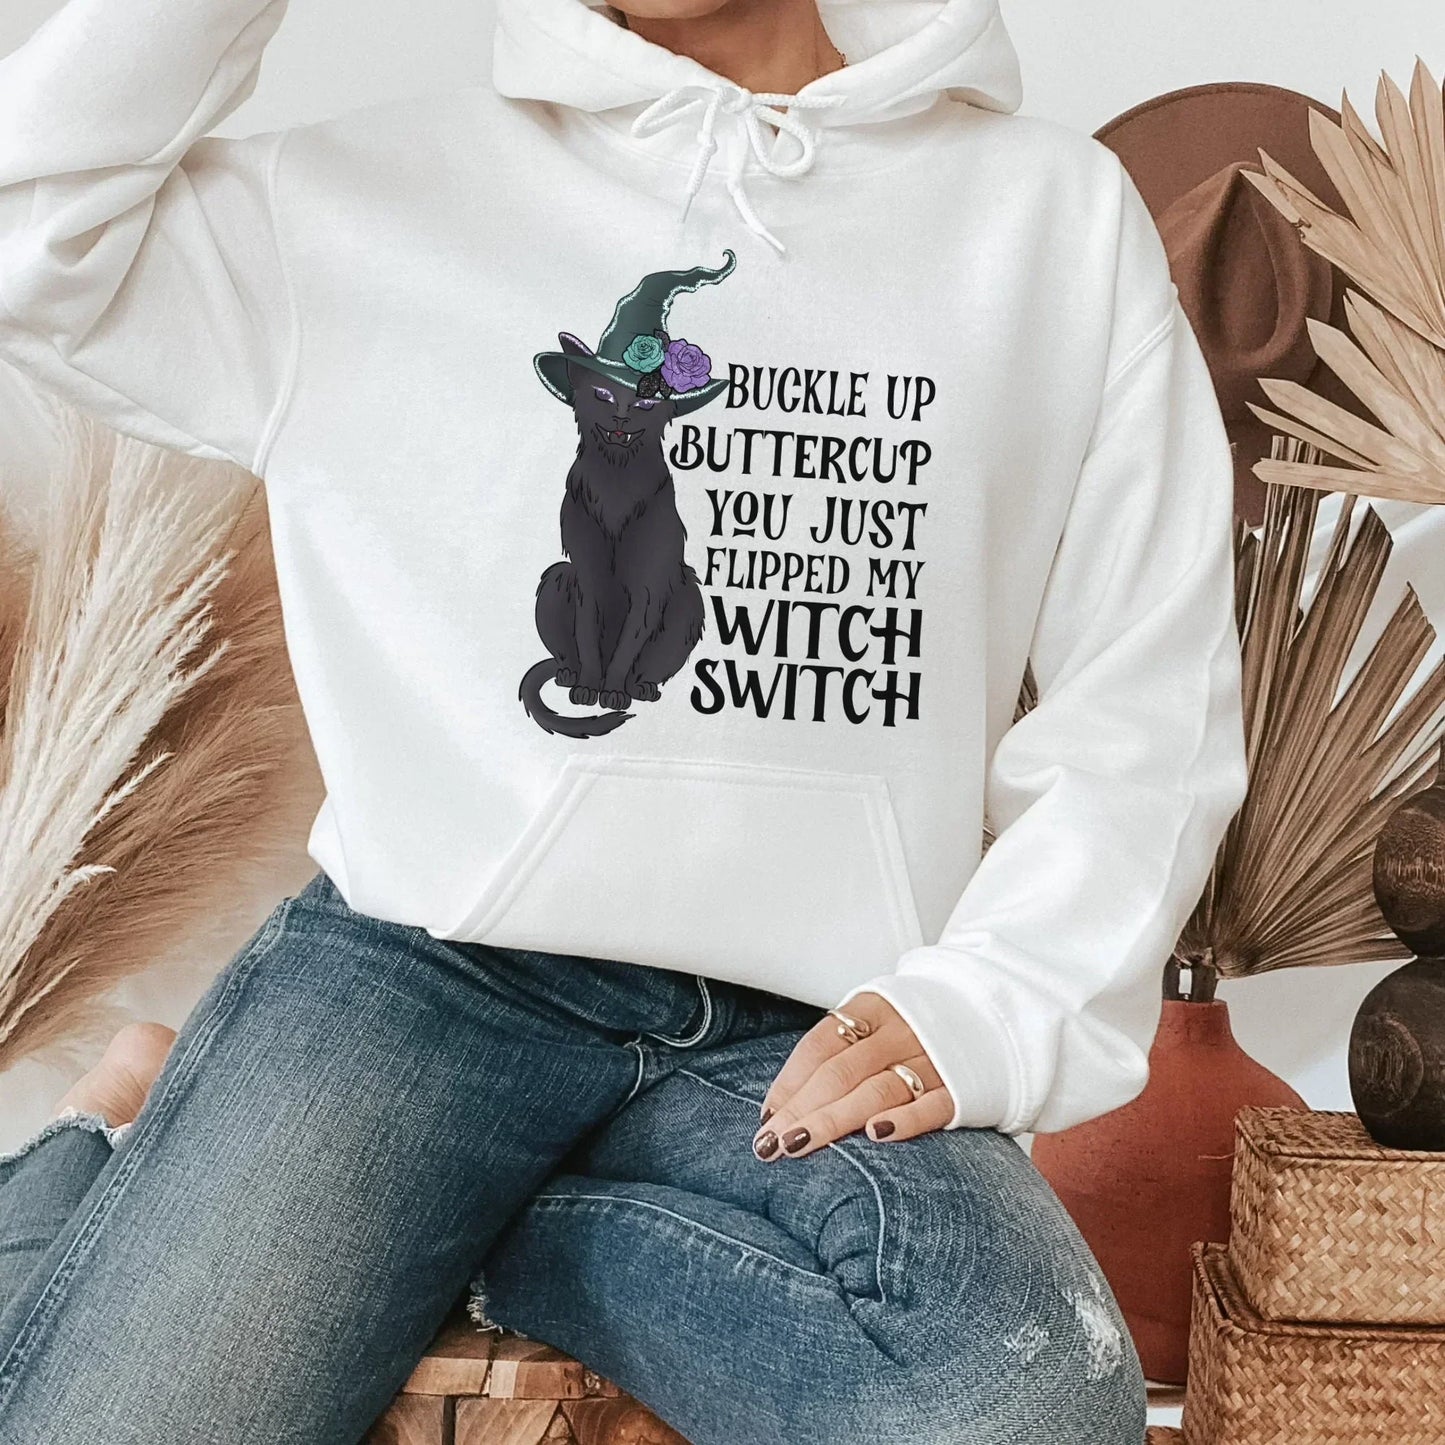 Funny Halloween Shirt, Black Cat Shirt, Gothic Shirt, Witchy Vibes, Pastel Halloween Sweatshirt, Magical Witch Hat Cat Shirt, Goth Style HMDesignStudioUS